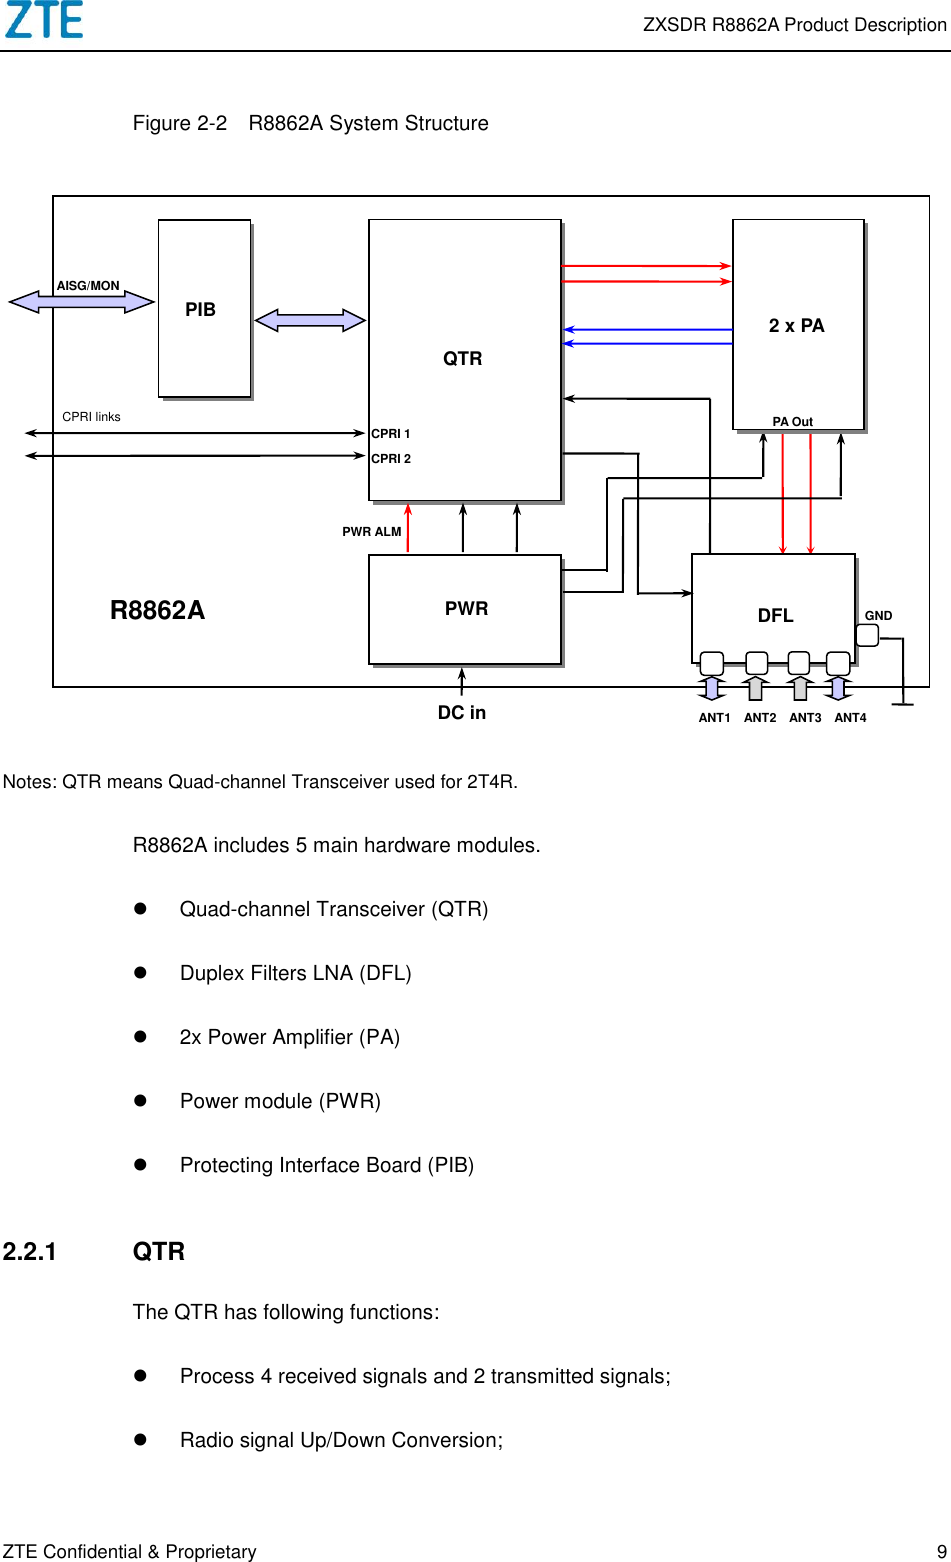  ZXSDR R8862A Product Description ZTE Confidential &amp; Proprietary 9 Figure 2-2  R8862A System Structure  Notes: QTR means Quad-channel Transceiver used for 2T4R. R8862A includes 5 main hardware modules.   Quad-channel Transceiver (QTR)   Duplex Filters LNA (DFL)  2x Power Amplifier (PA)   Power module (PWR)   Protecting Interface Board (PIB) 2.2.1  QTR The QTR has following functions:   Process 4 received signals and 2 transmitted signals;   Radio signal Up/Down Conversion; PIB QTR PWR DFL CPRI 1 CPRI 2 PWR ALM  PA Out DC in      ANT1  ANT2    ANT3    ANT4 R8862A 2 x PA PA Out GND CPRI links AISG/MON 